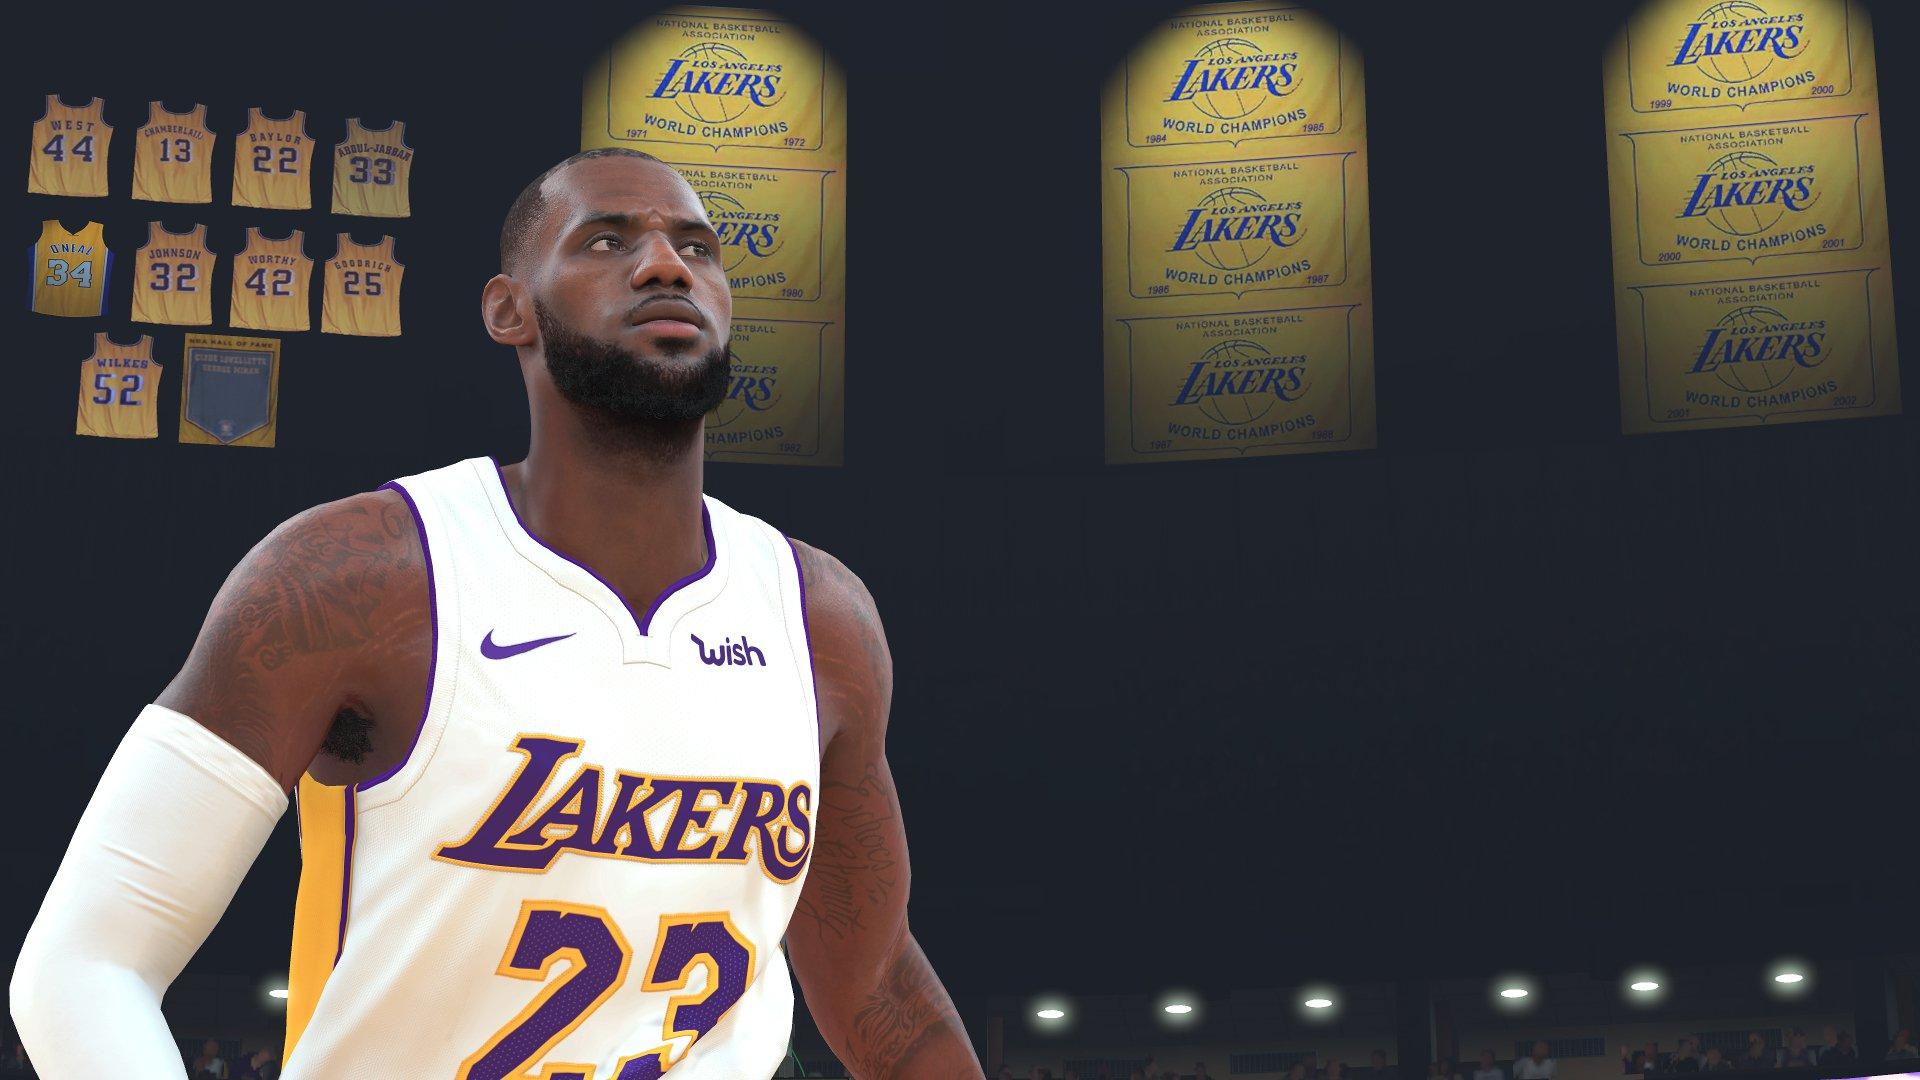 NBA 2K20 Ratings: LeBron James Doesn't Deserve 97 Or The Top